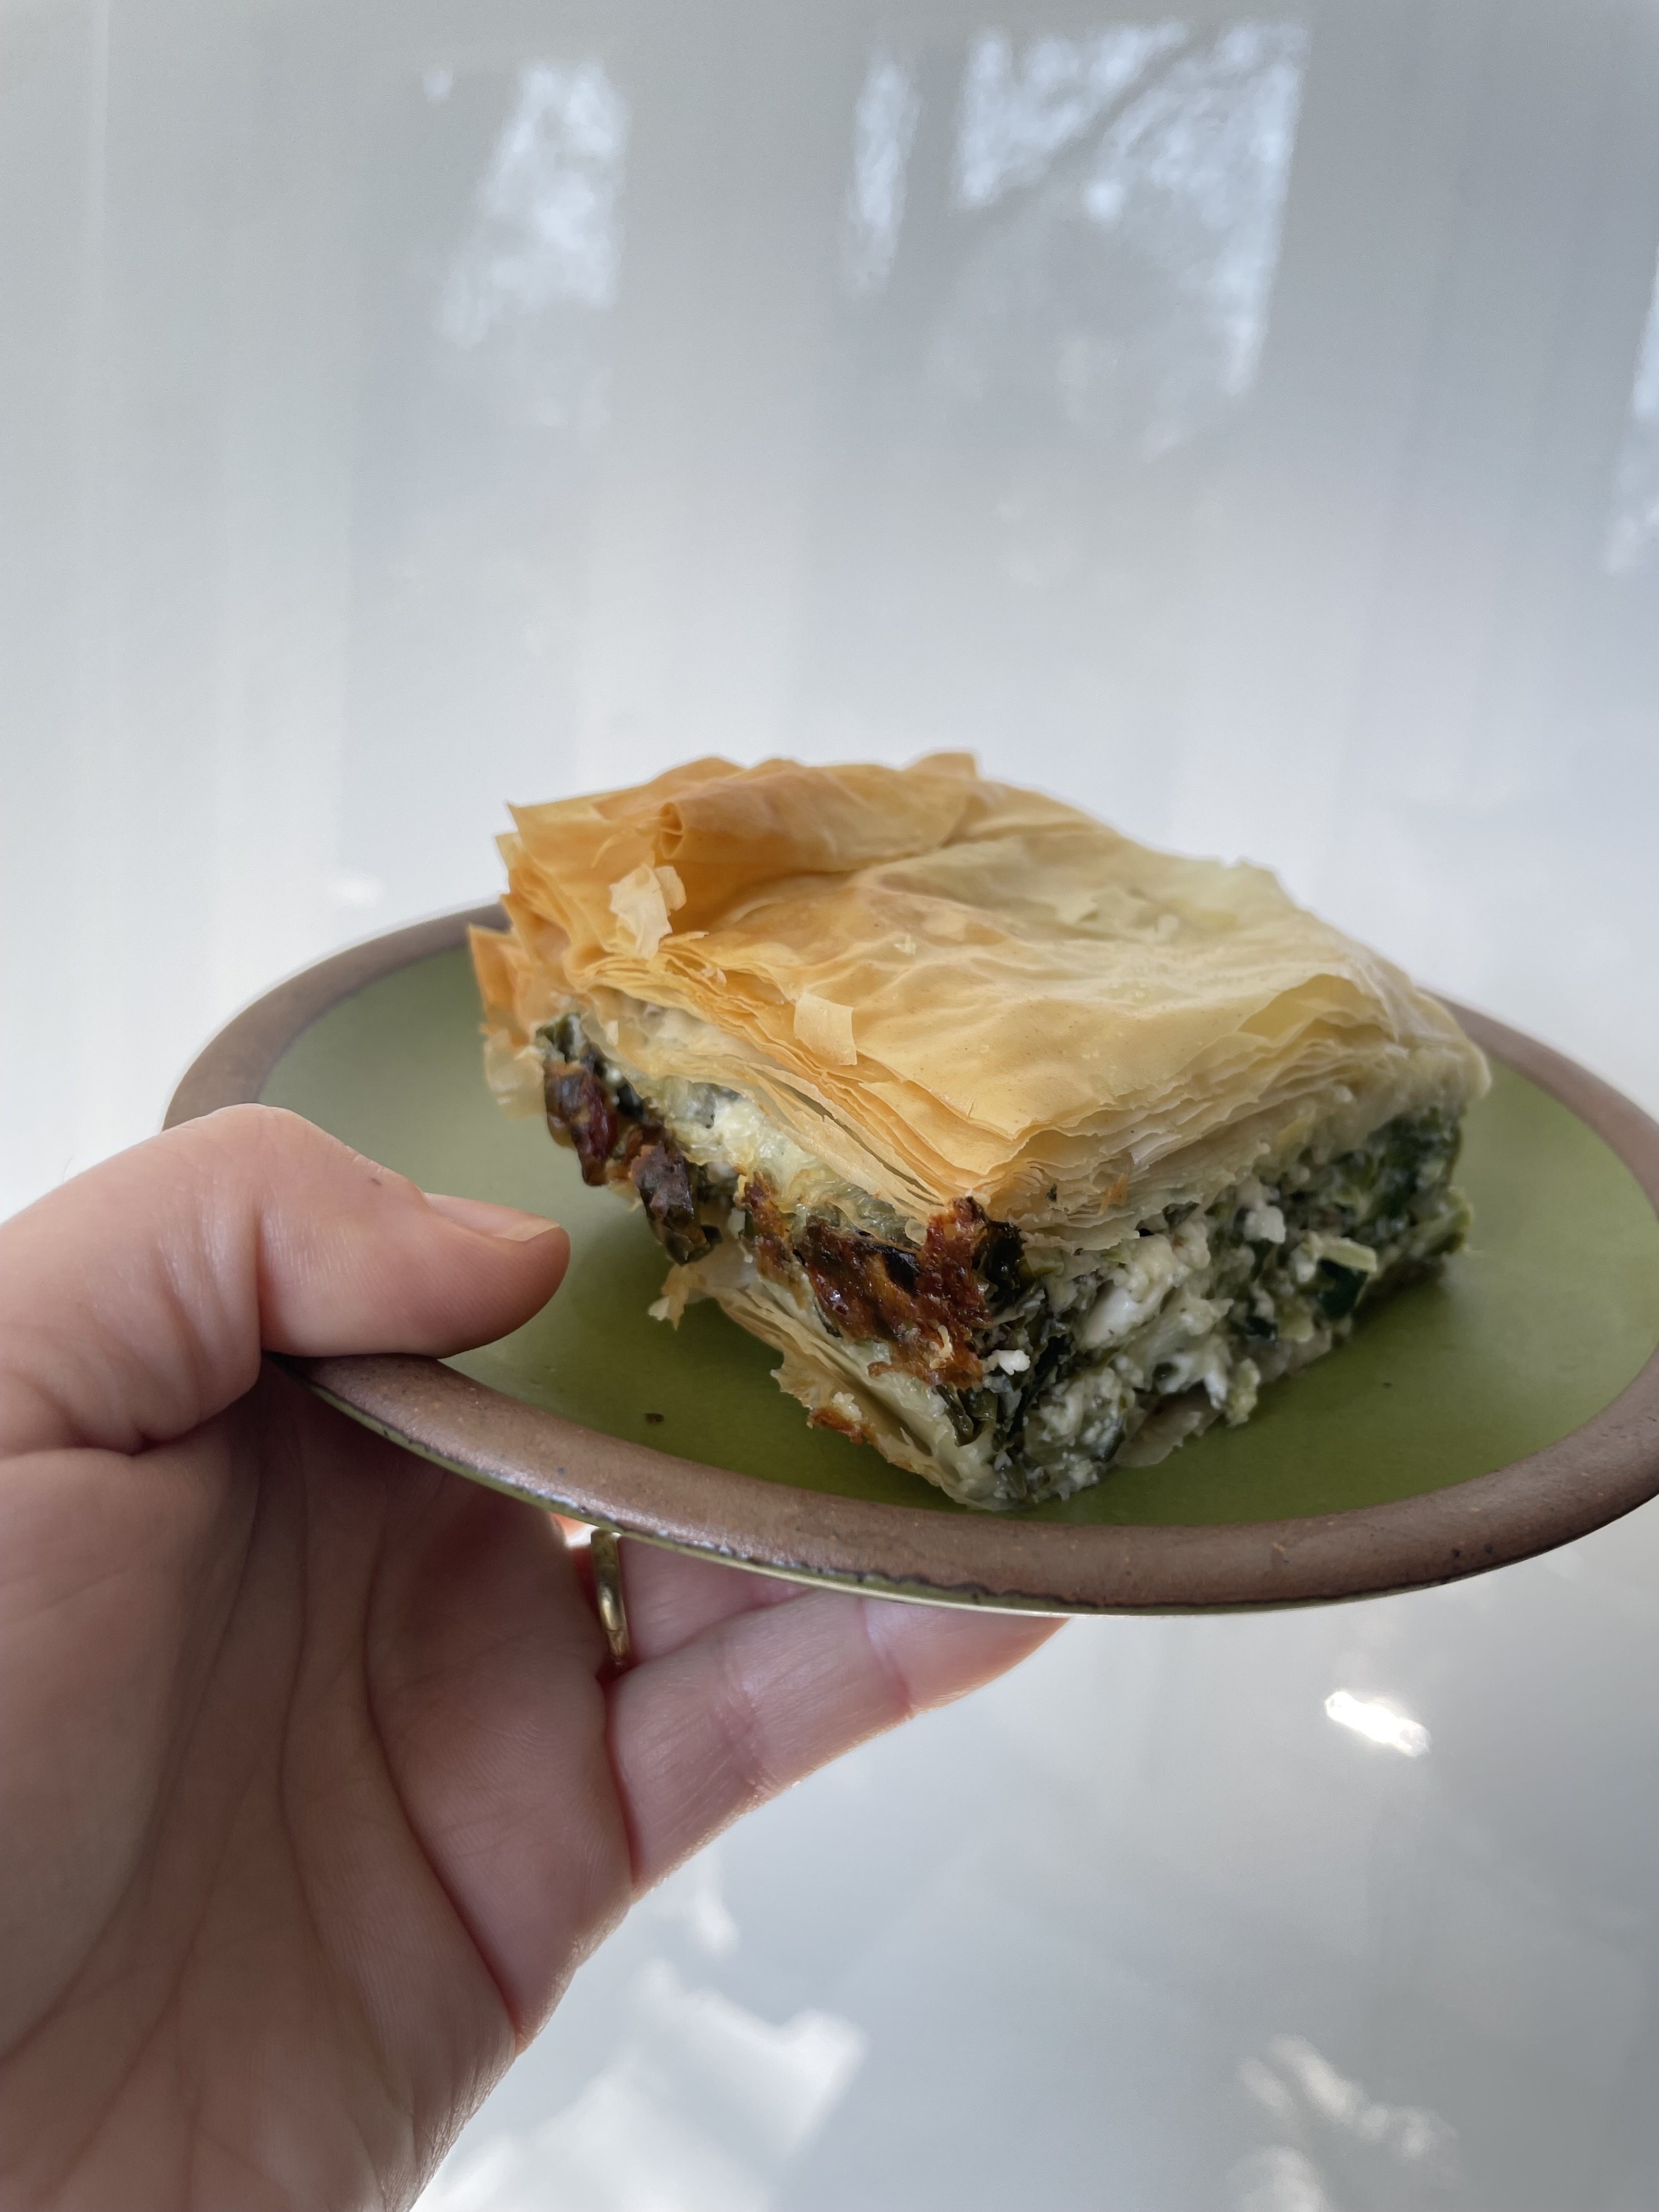 A photo of Antigoni's hand holding a slice of the spanakopita she made. It looks supremely delicious.